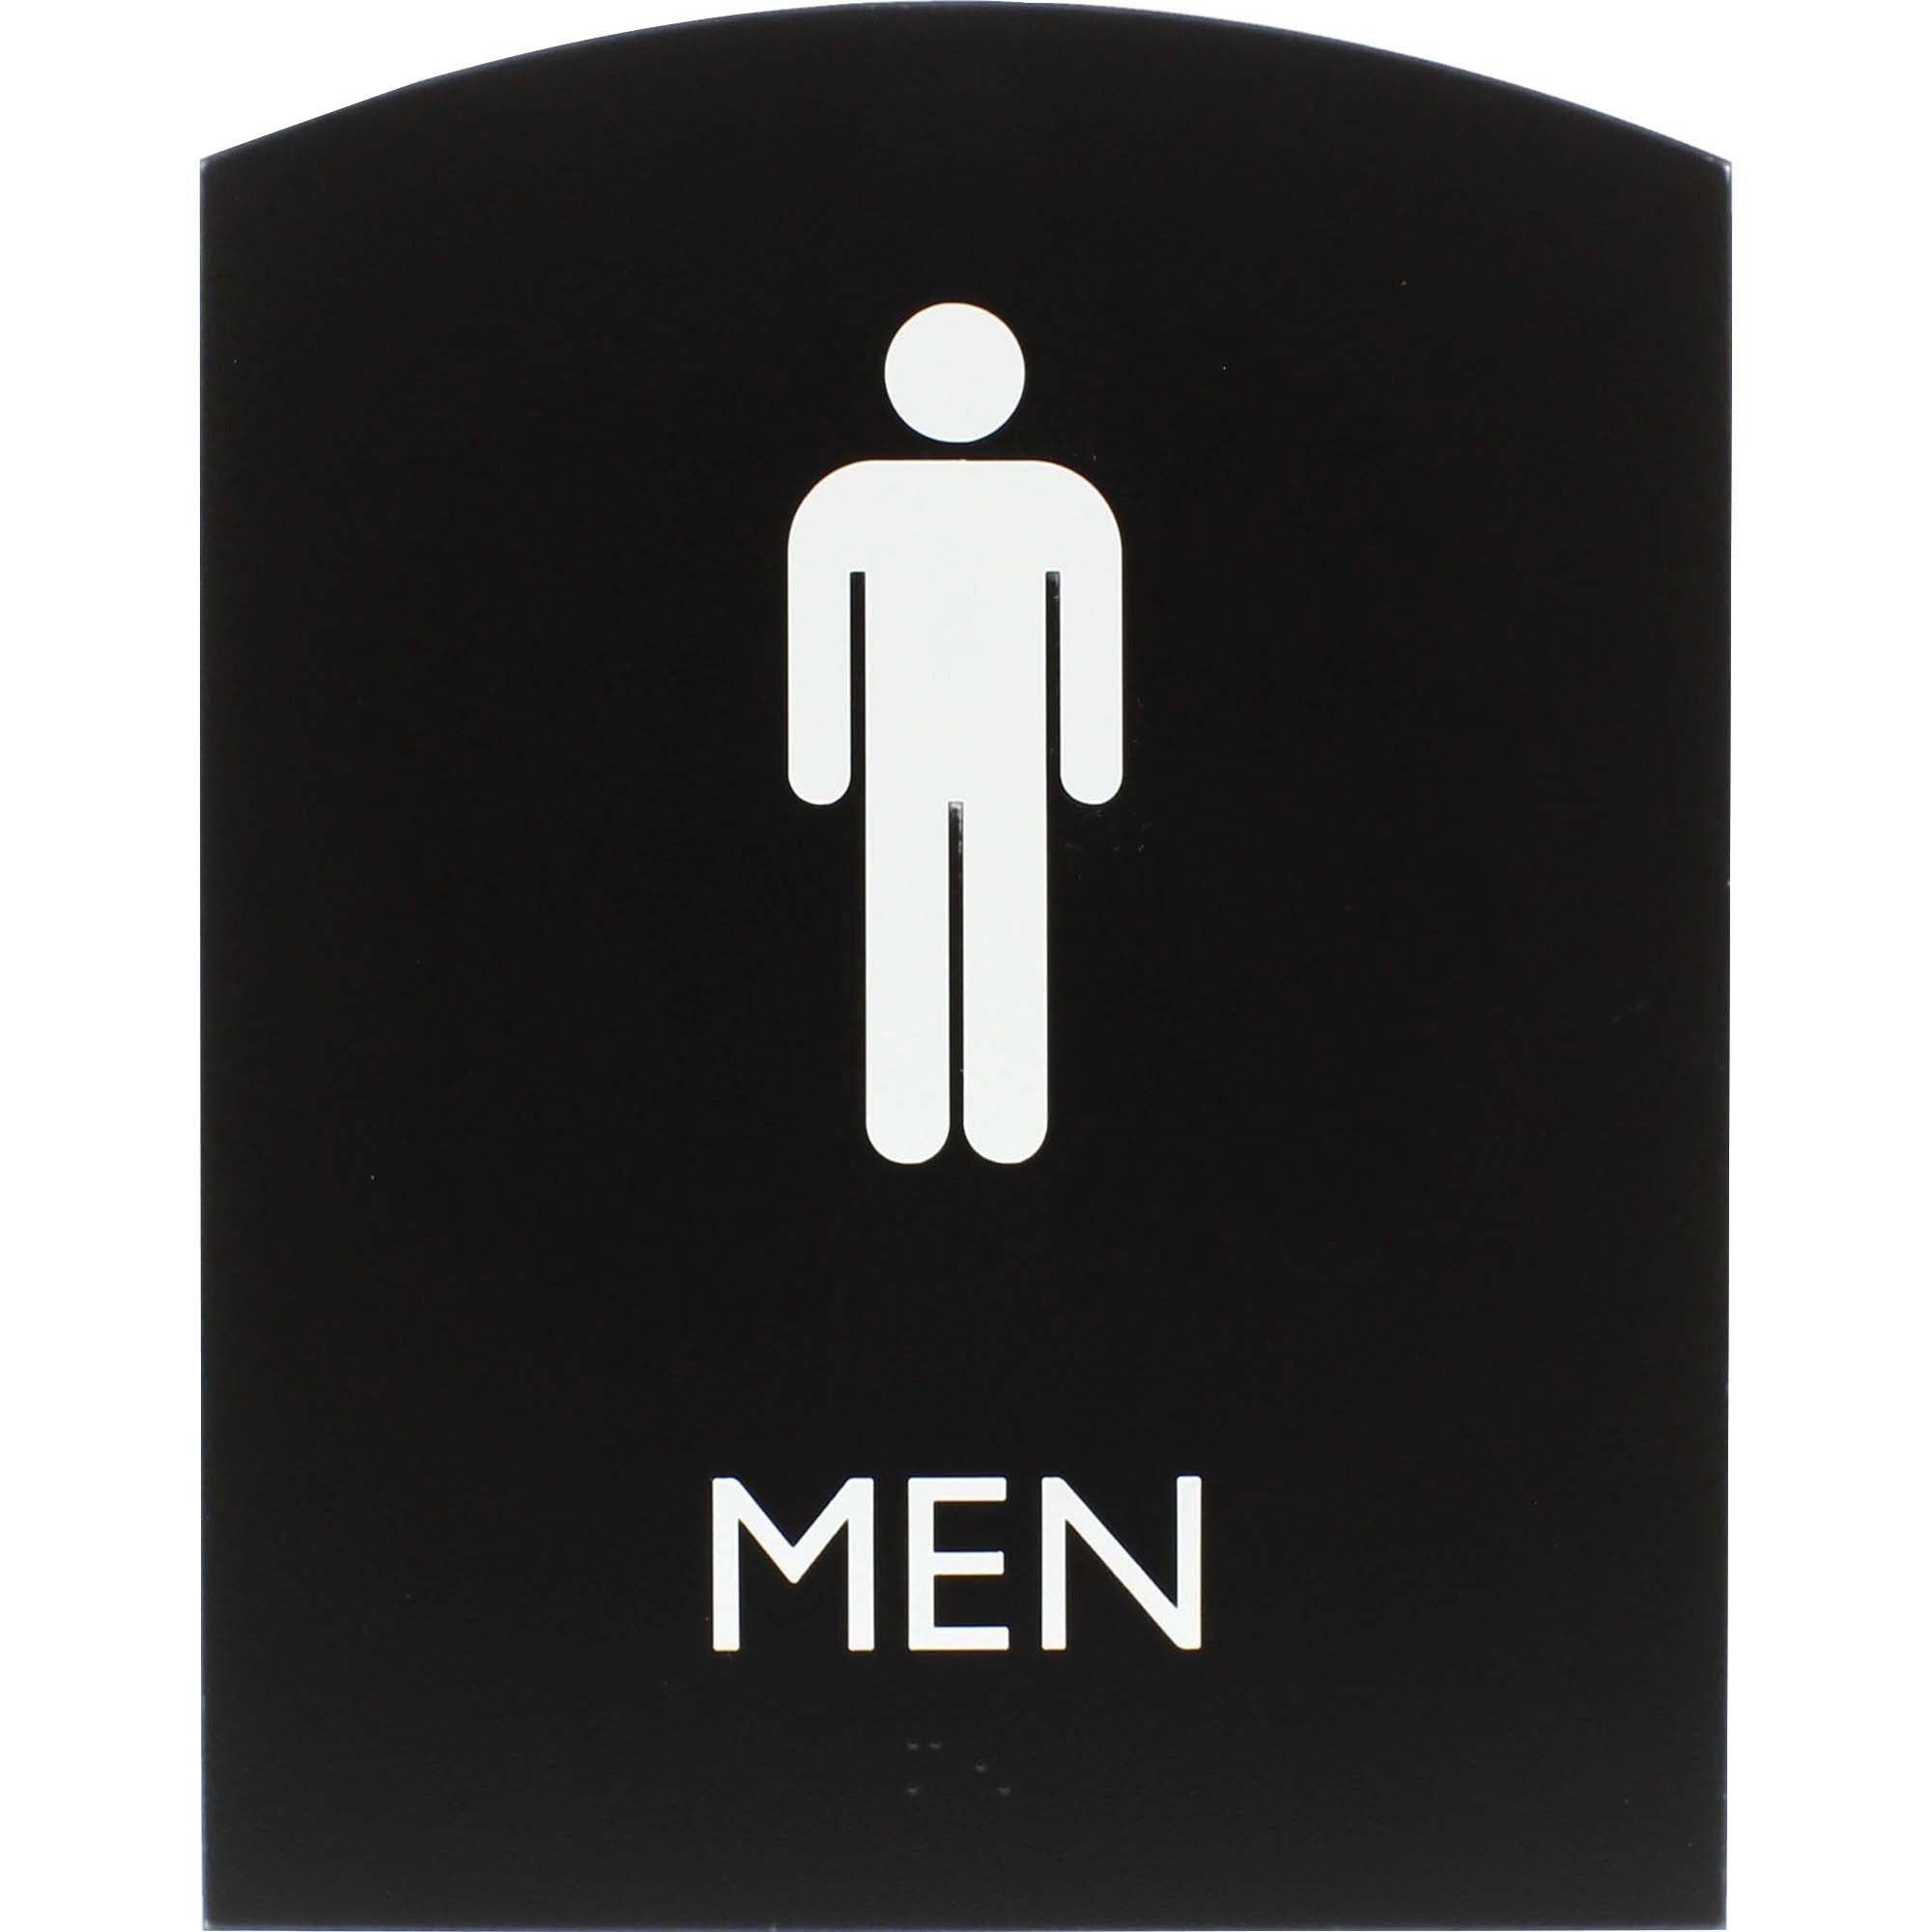 lorell-arched-mens-restroom-sign-1-each-men-print-message-68-width-x-85-height-rectangular-shape-surface-mountable-easy-readability-braille-plastic-black_llr02676 - 1